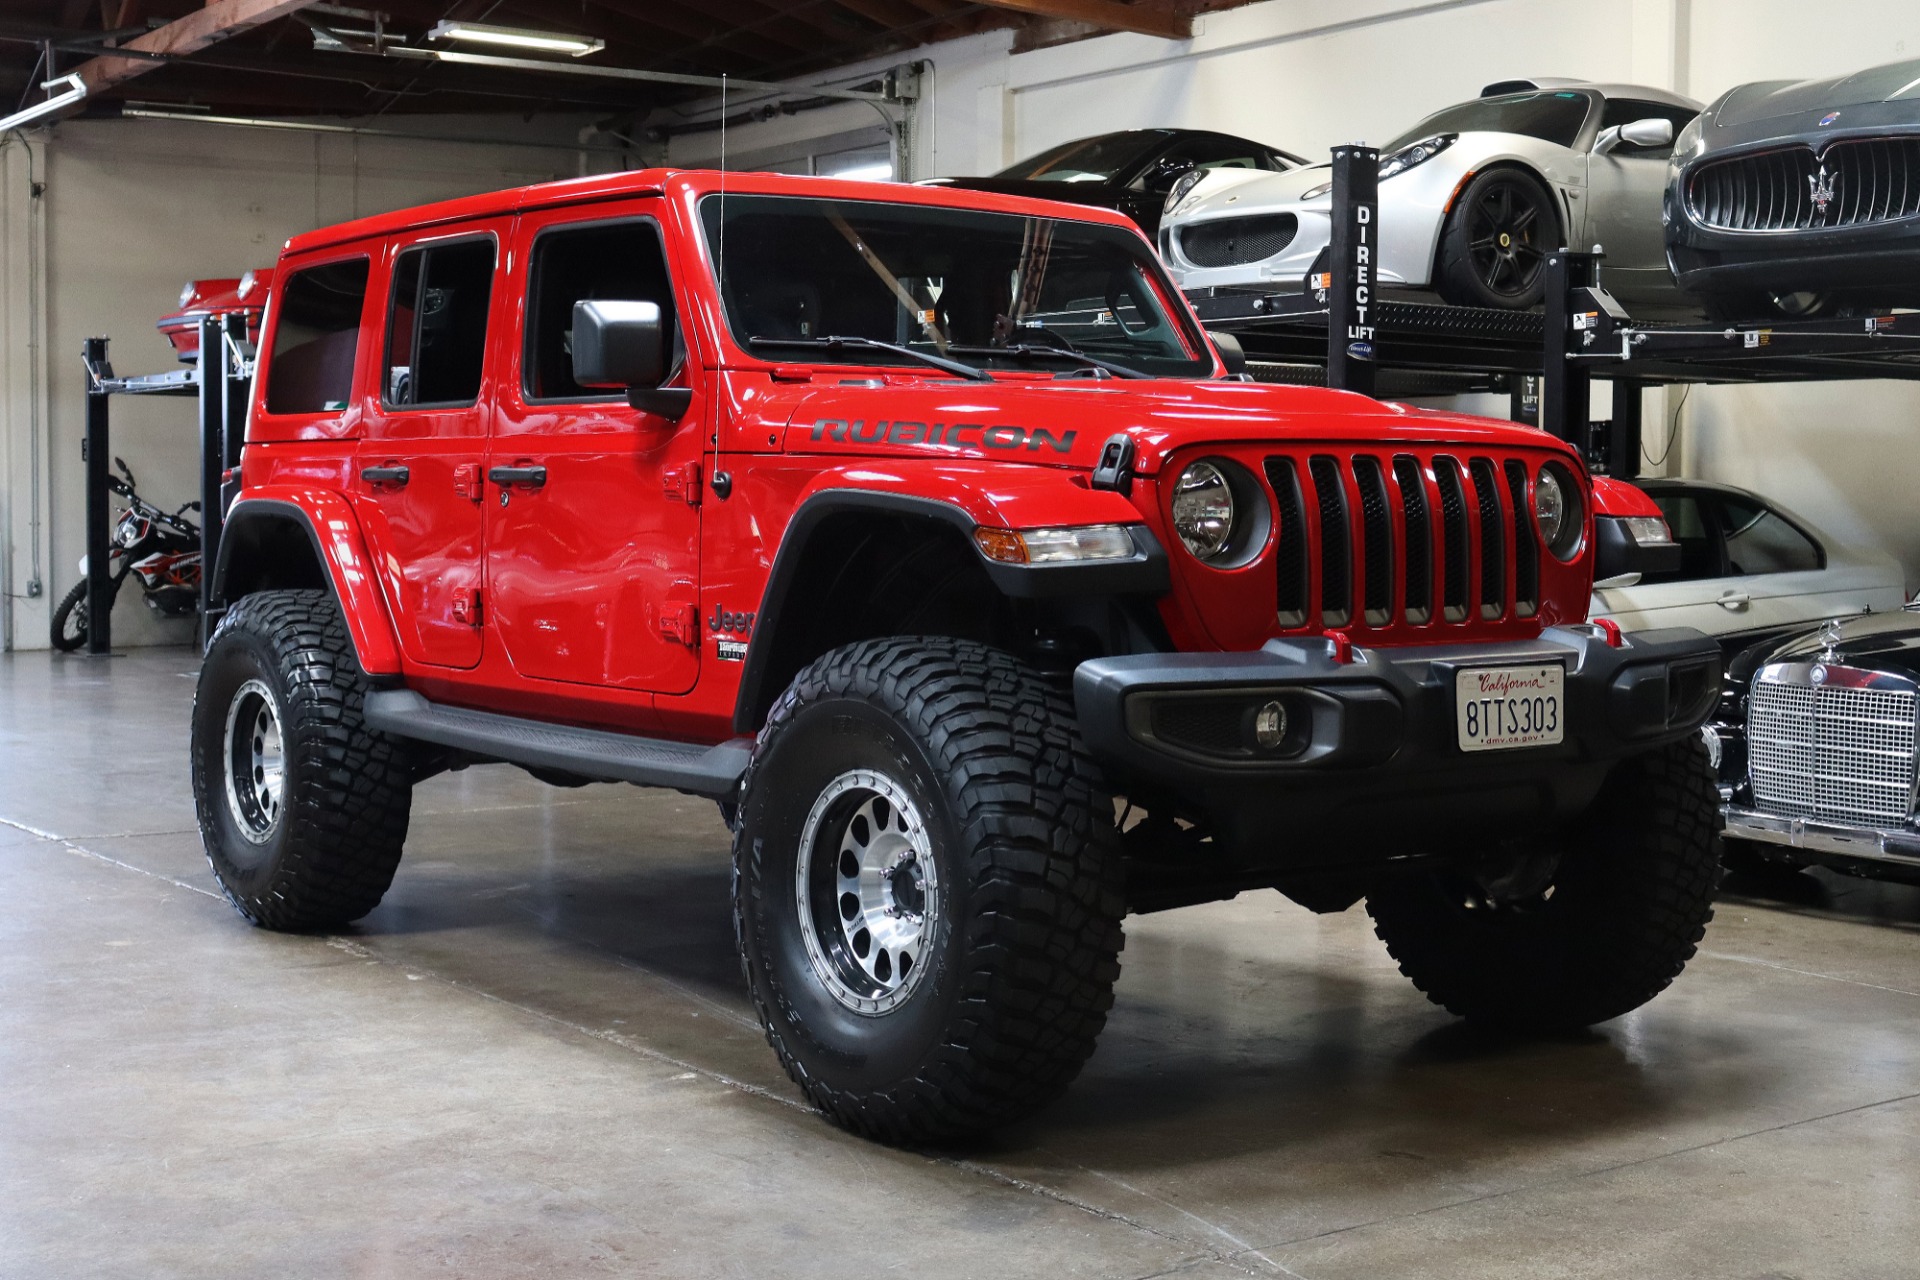 Used 2019 Jeep Wrangler Unlimited Rubicon for sale $54,995 at San Francisco Sports Cars in San Carlos CA 94070 1